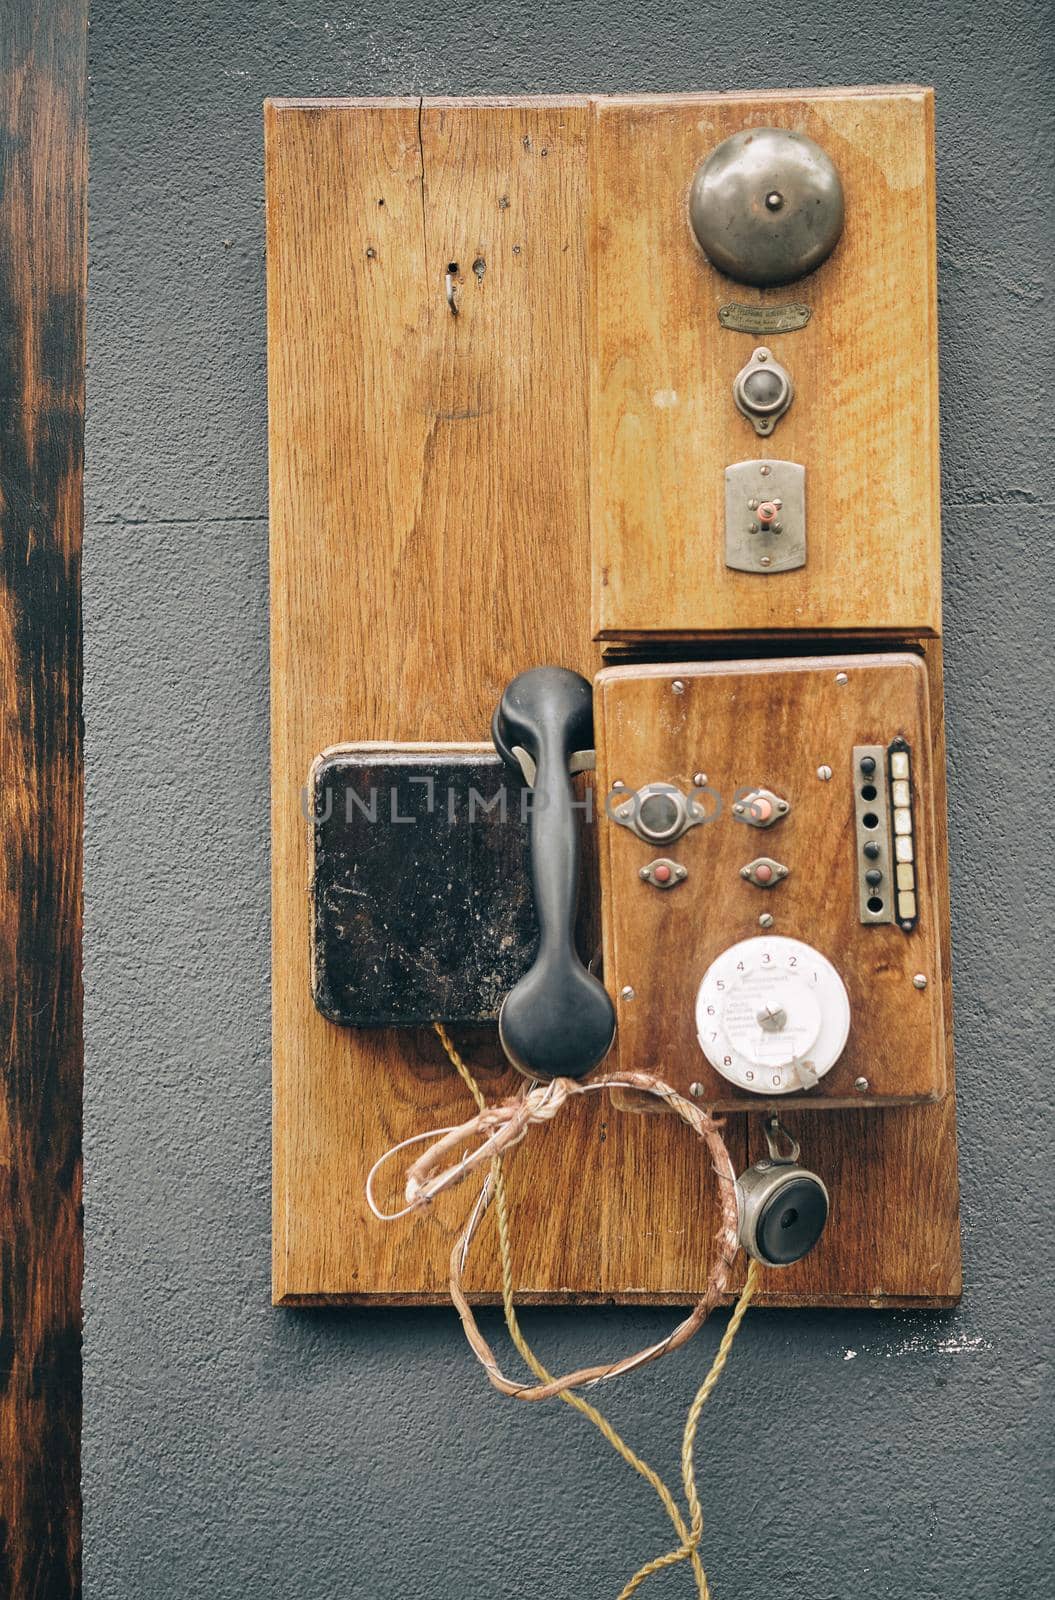 vintage old wood cabin telephone. by Sandronize